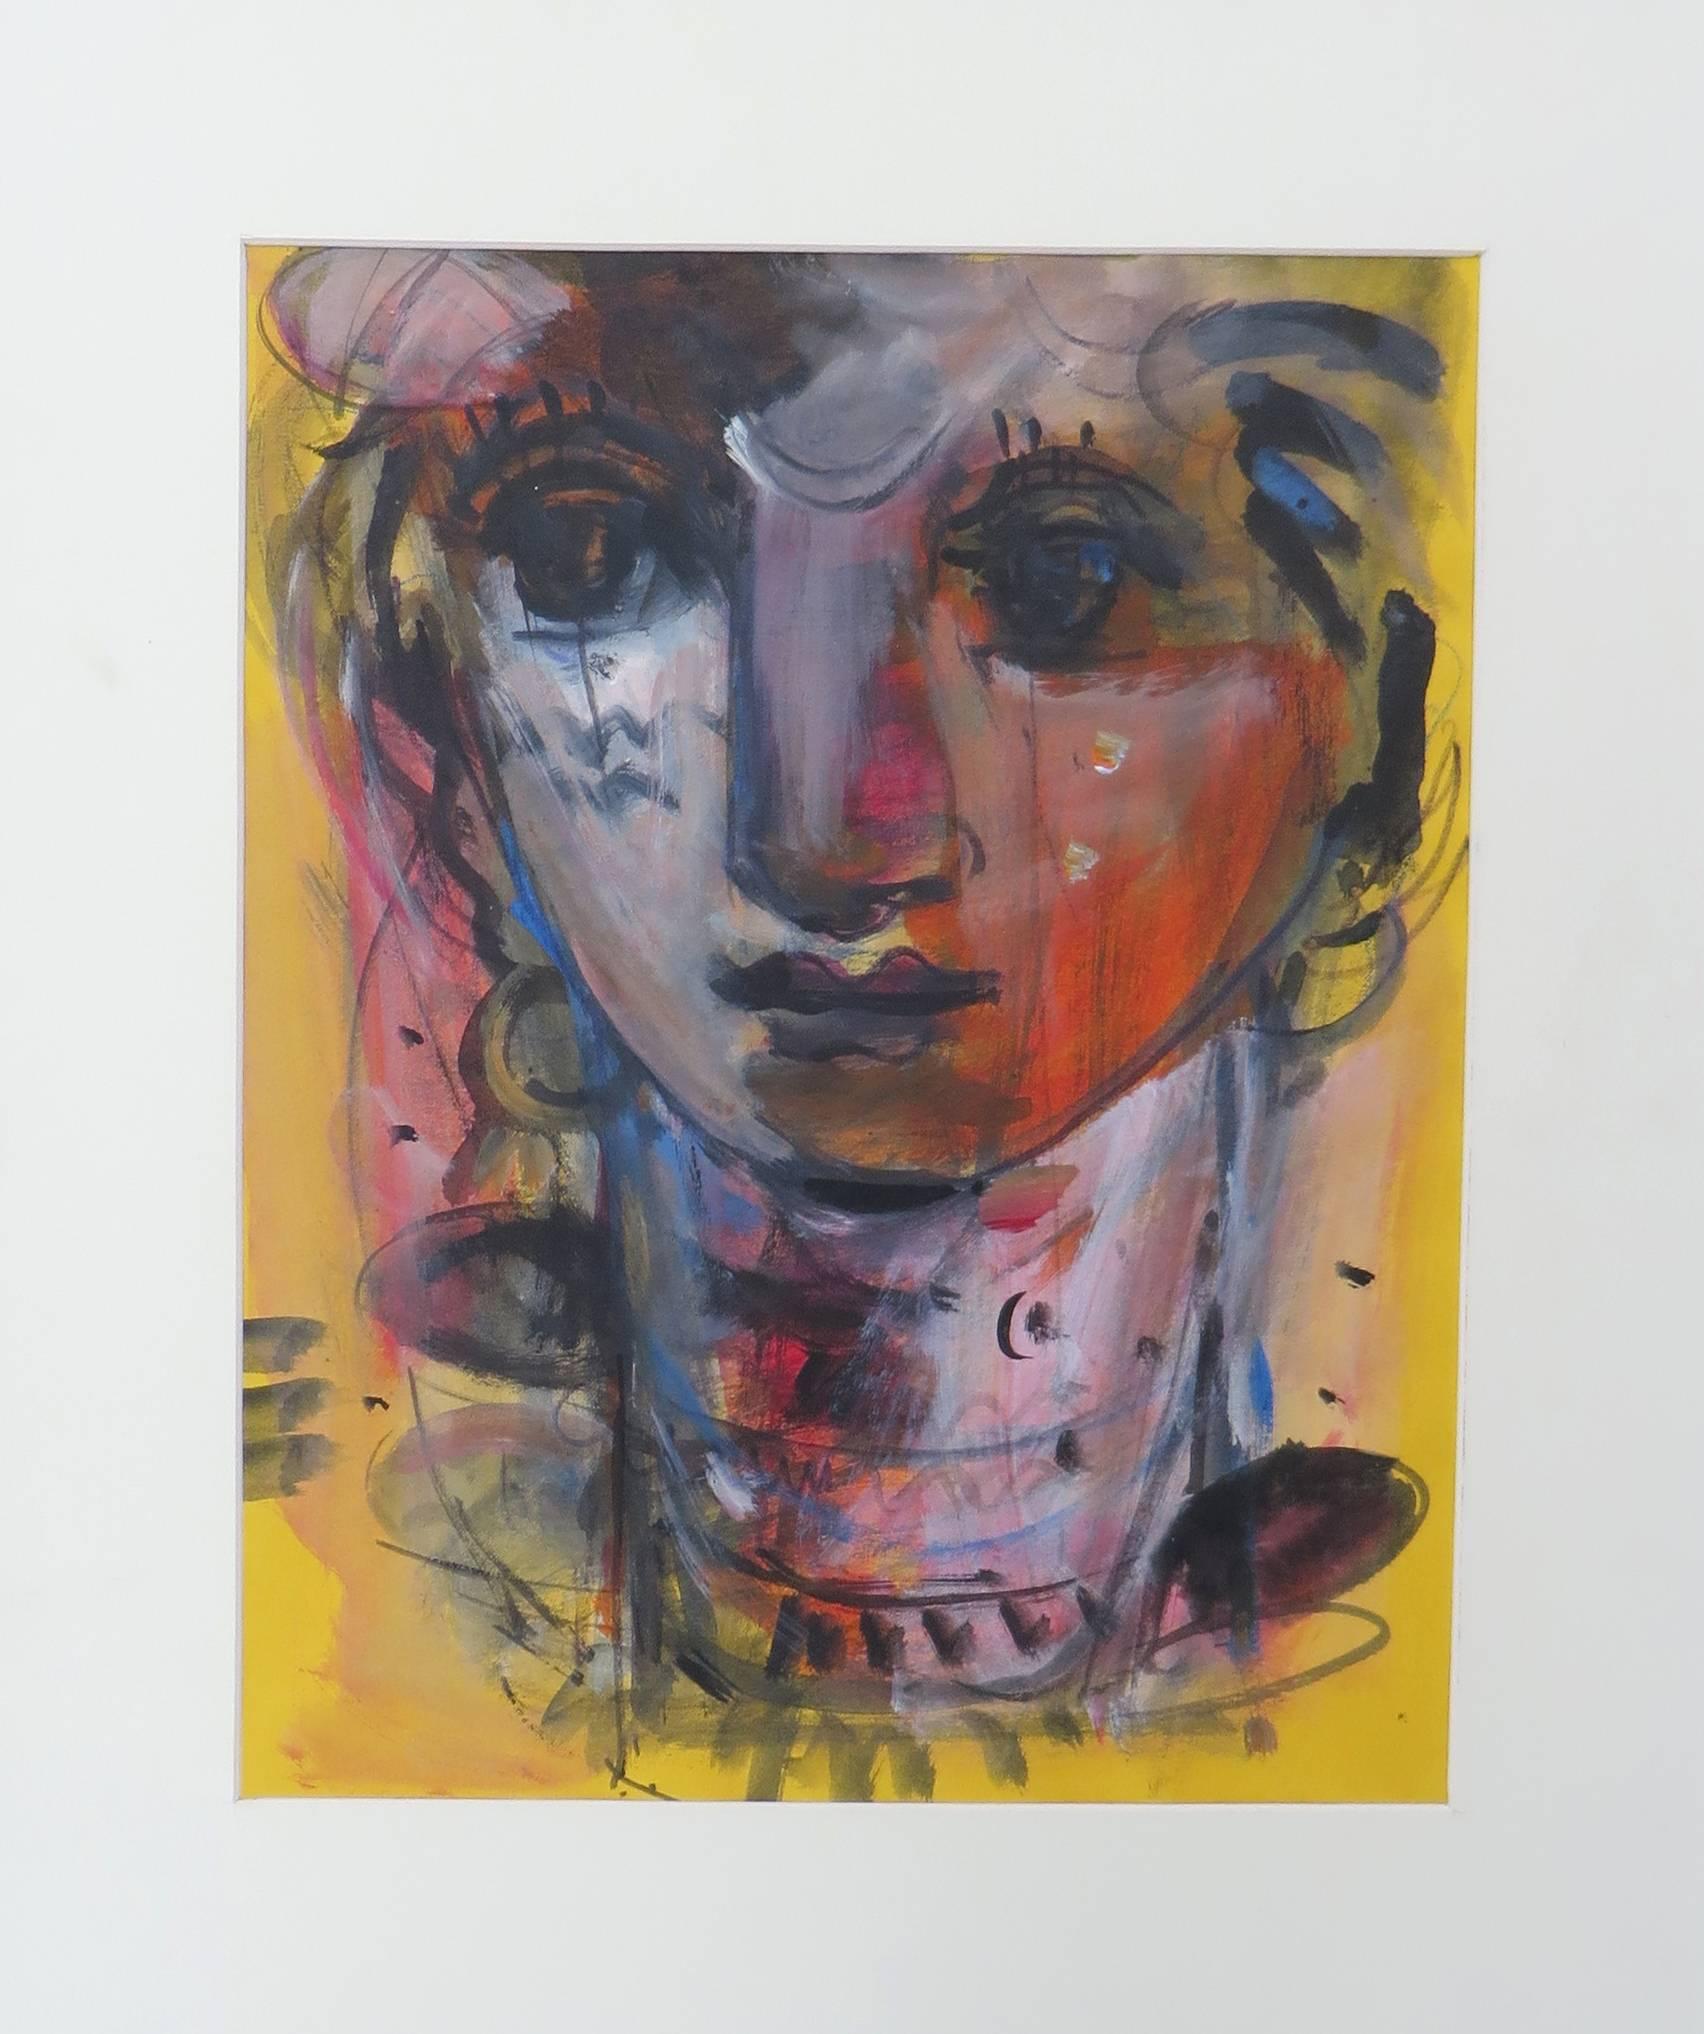 Faces, Moods, Expression, Mixed Media work by Contemporary Artist 